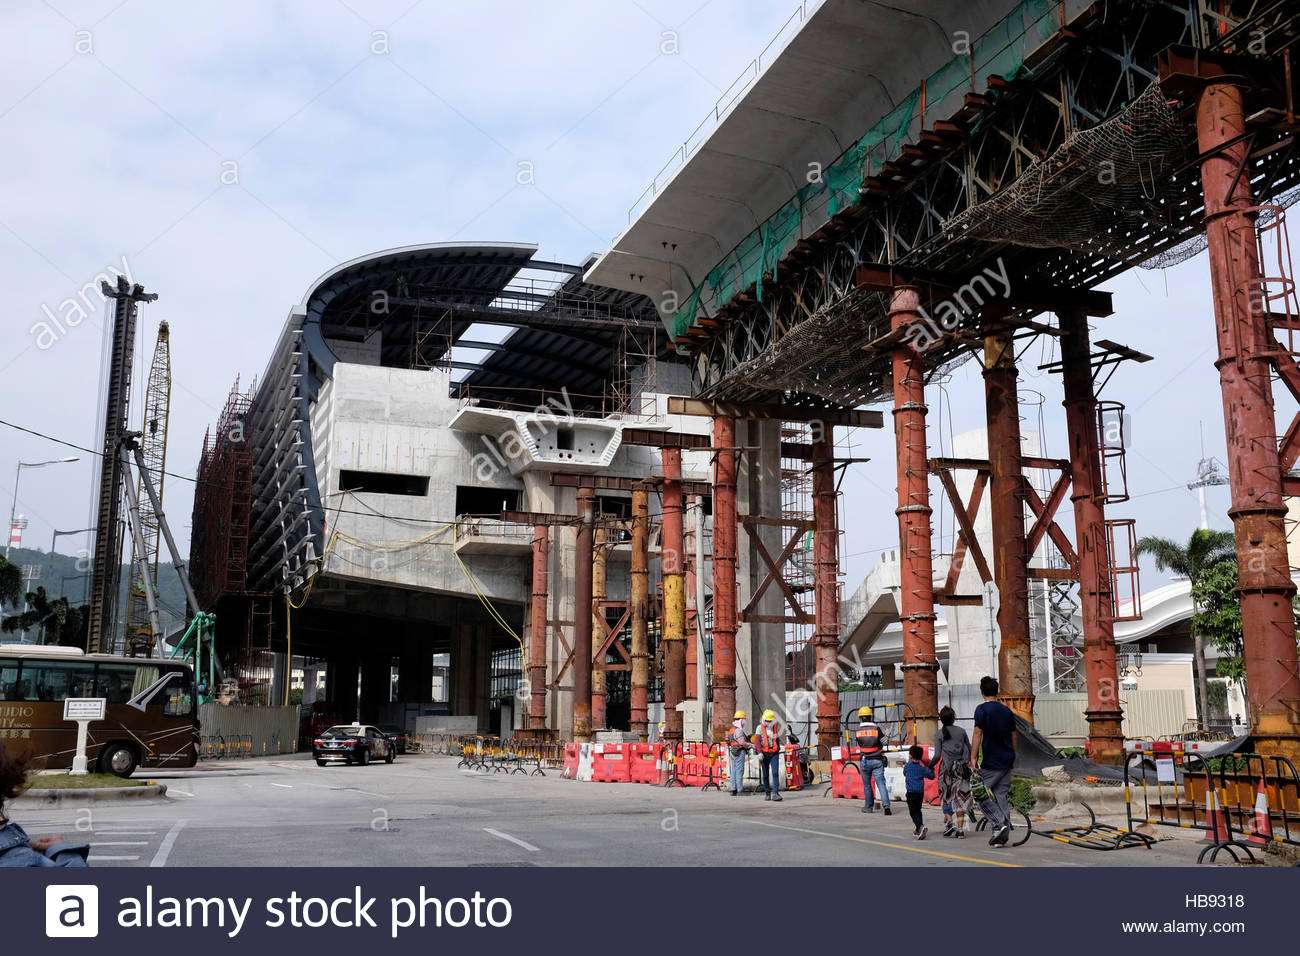 Macau’s Light Rail Transit is expected to improve the city’s cross-border links when it opens in 2019. Photo: Alamy